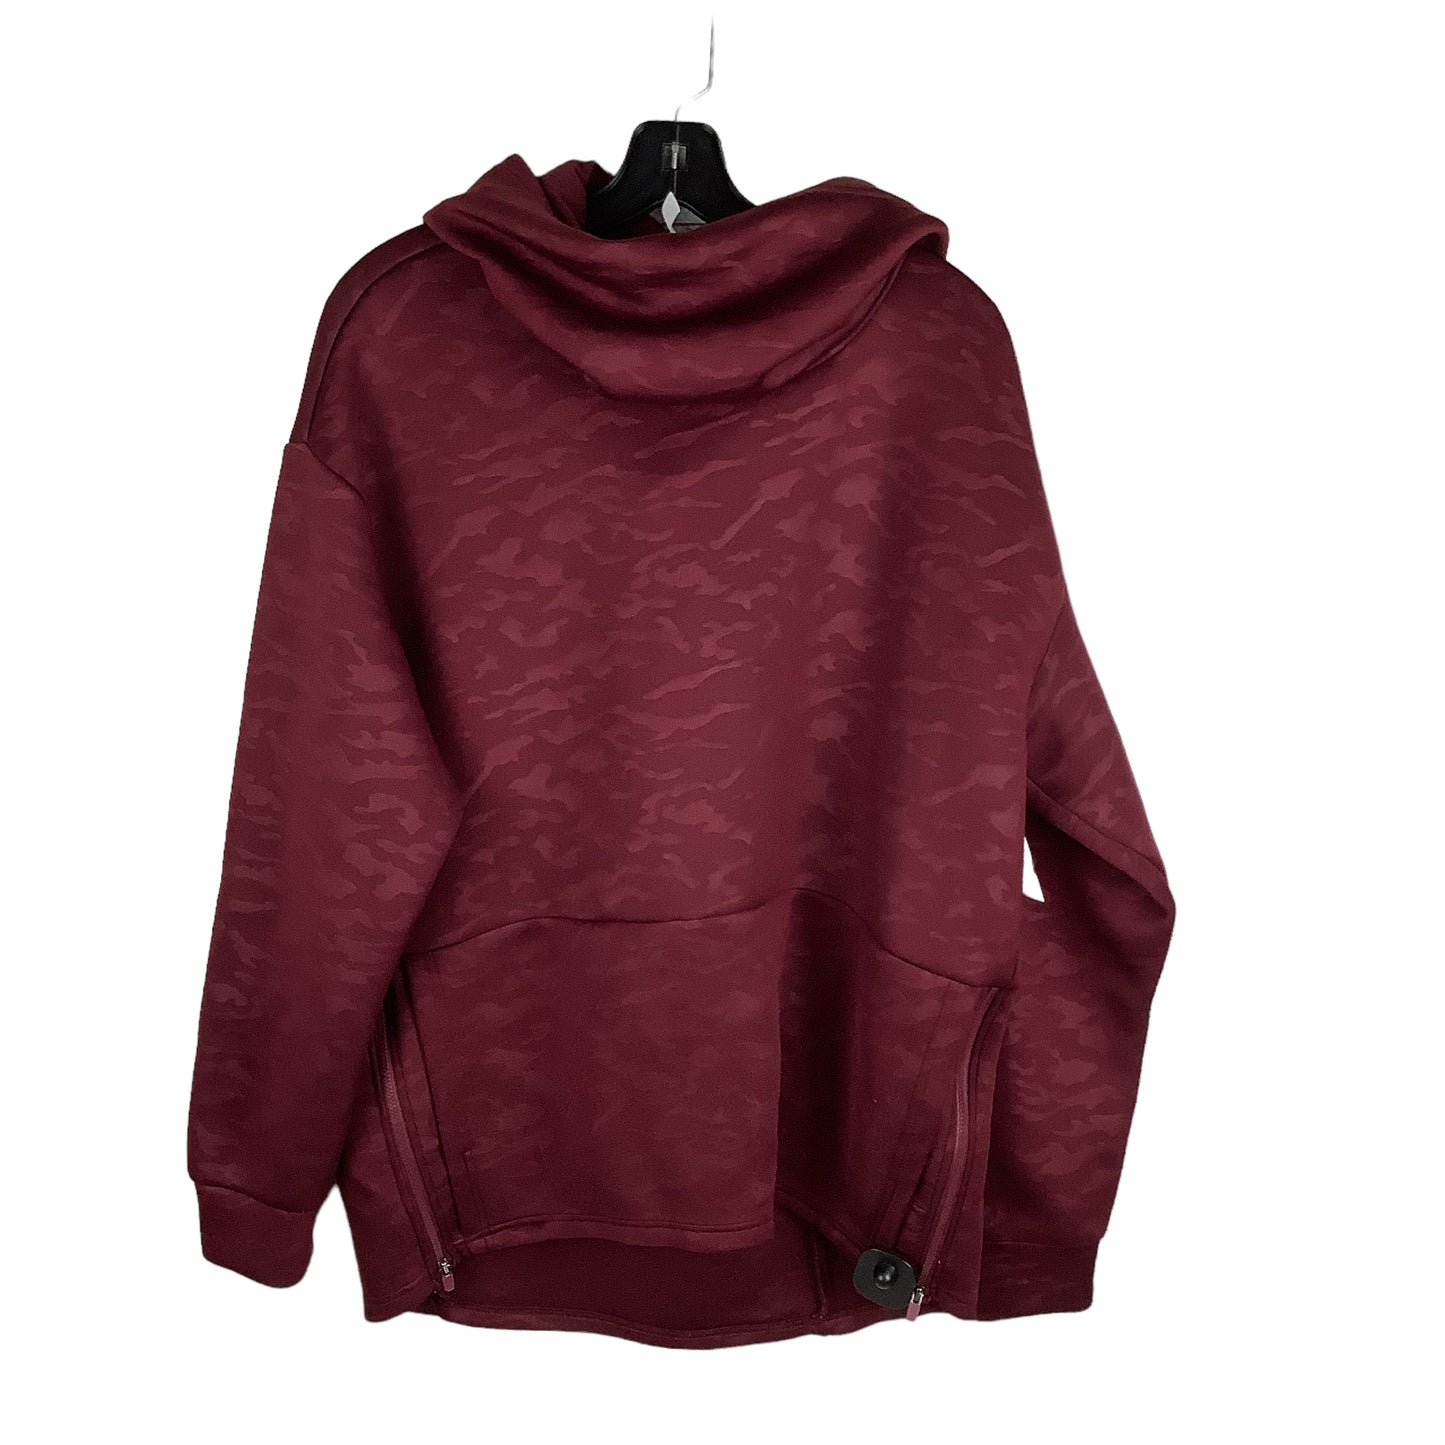 Athletic Sweatshirt Hoodie By Fabletics  Size: L